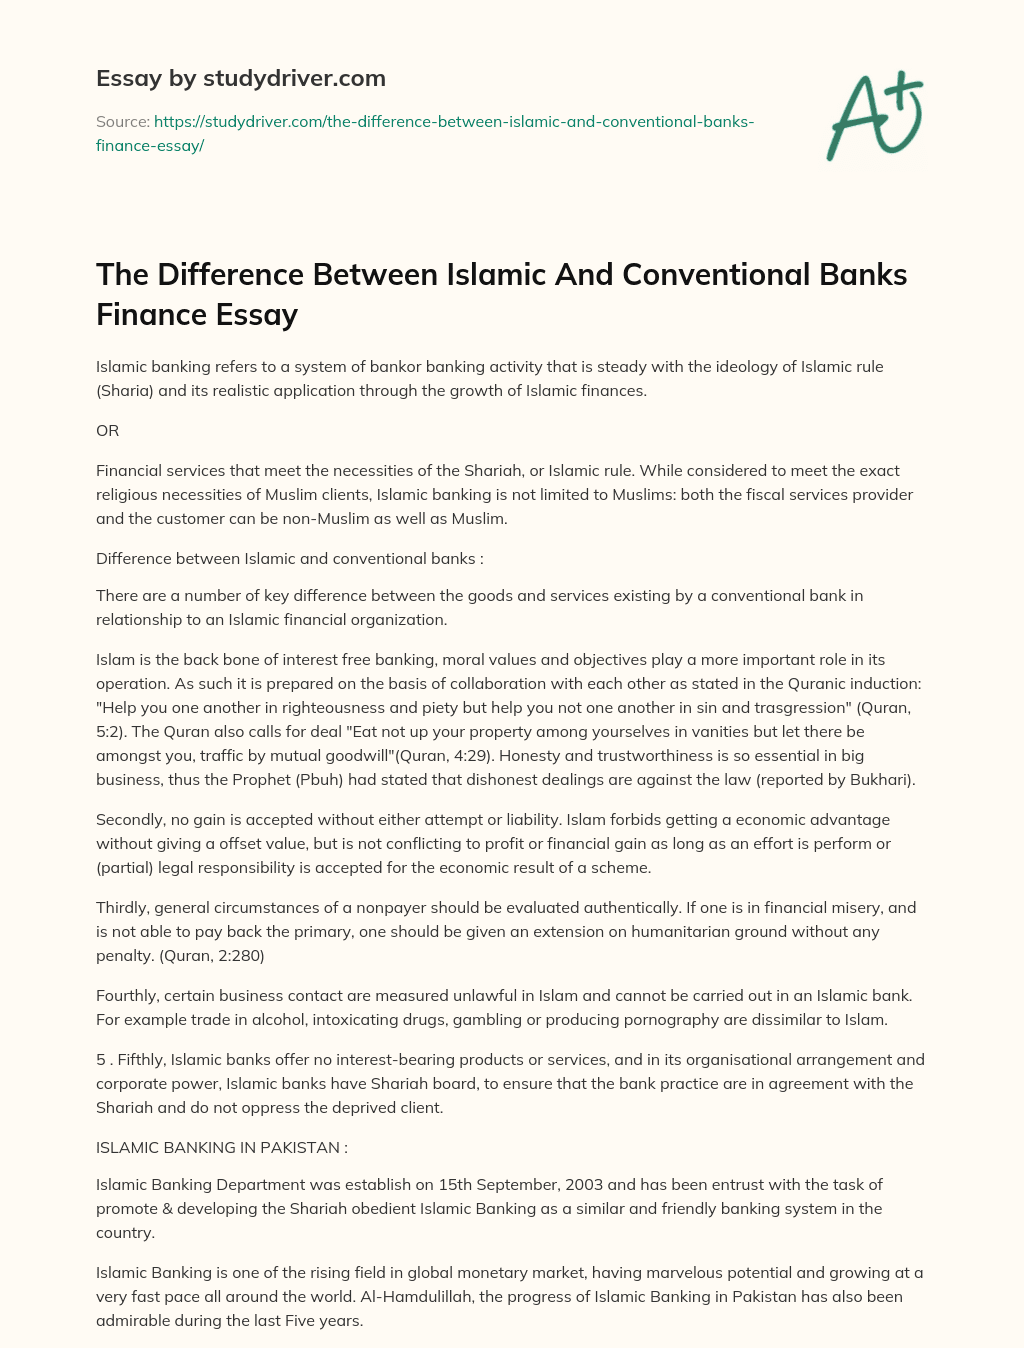 The Difference between Islamic and Conventional Banks Finance Essay essay